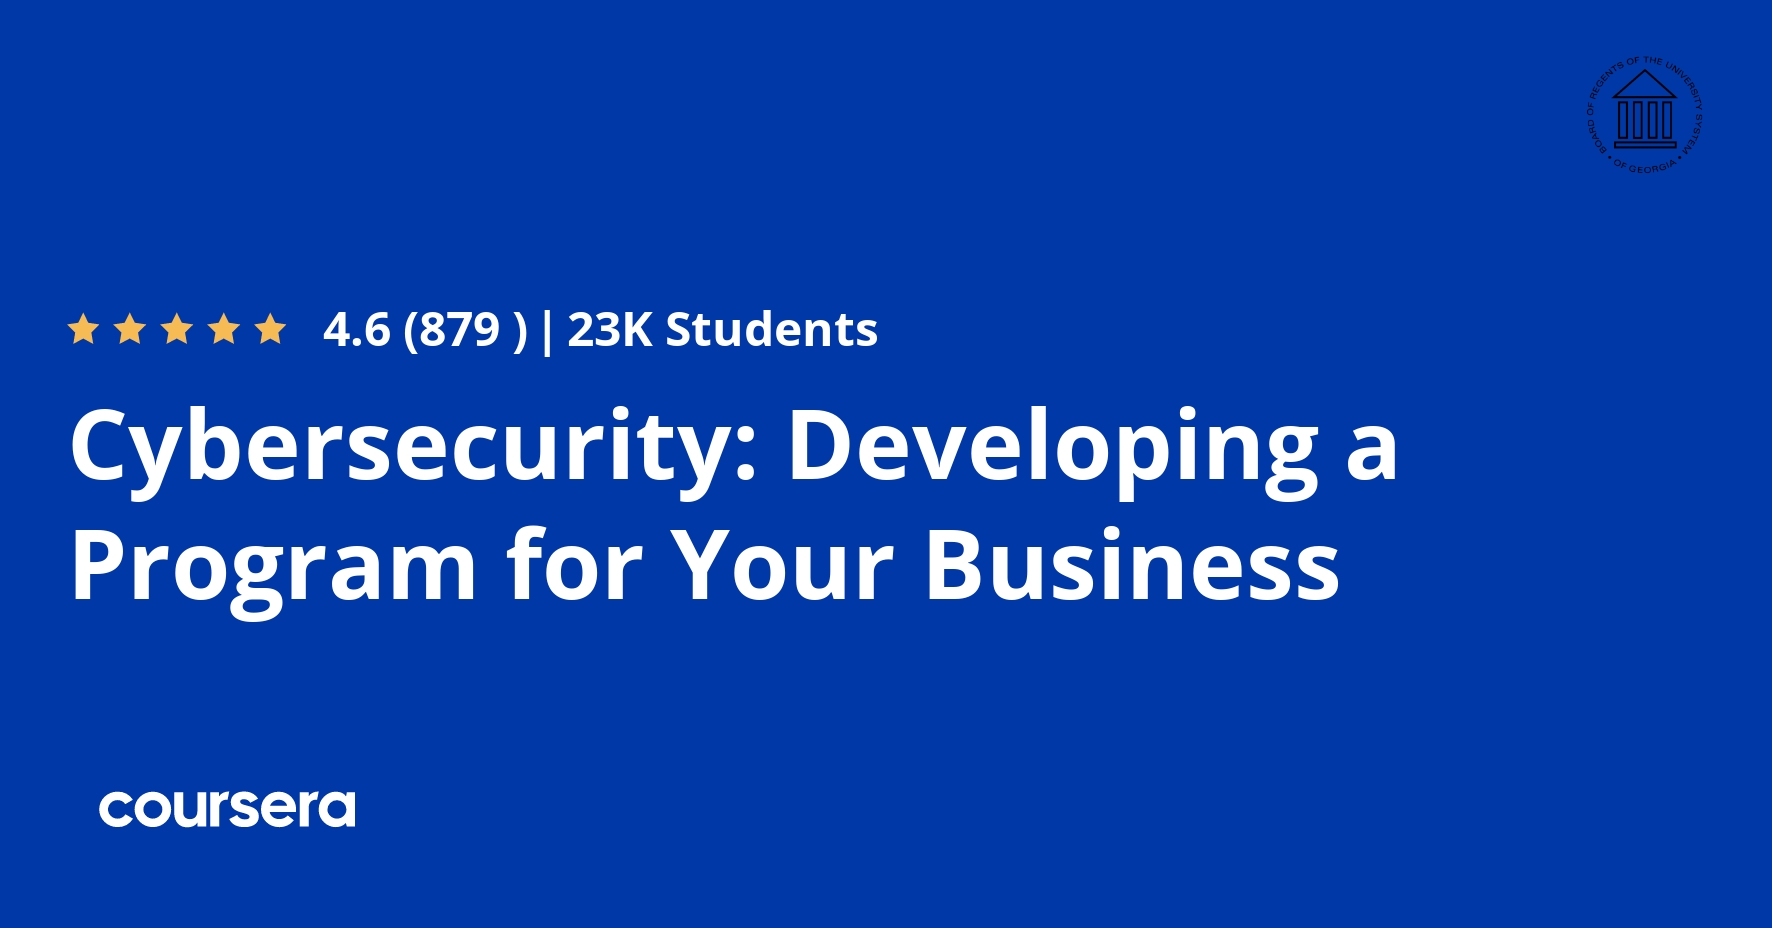 cybersecurity-developing-a-program-for-your-business